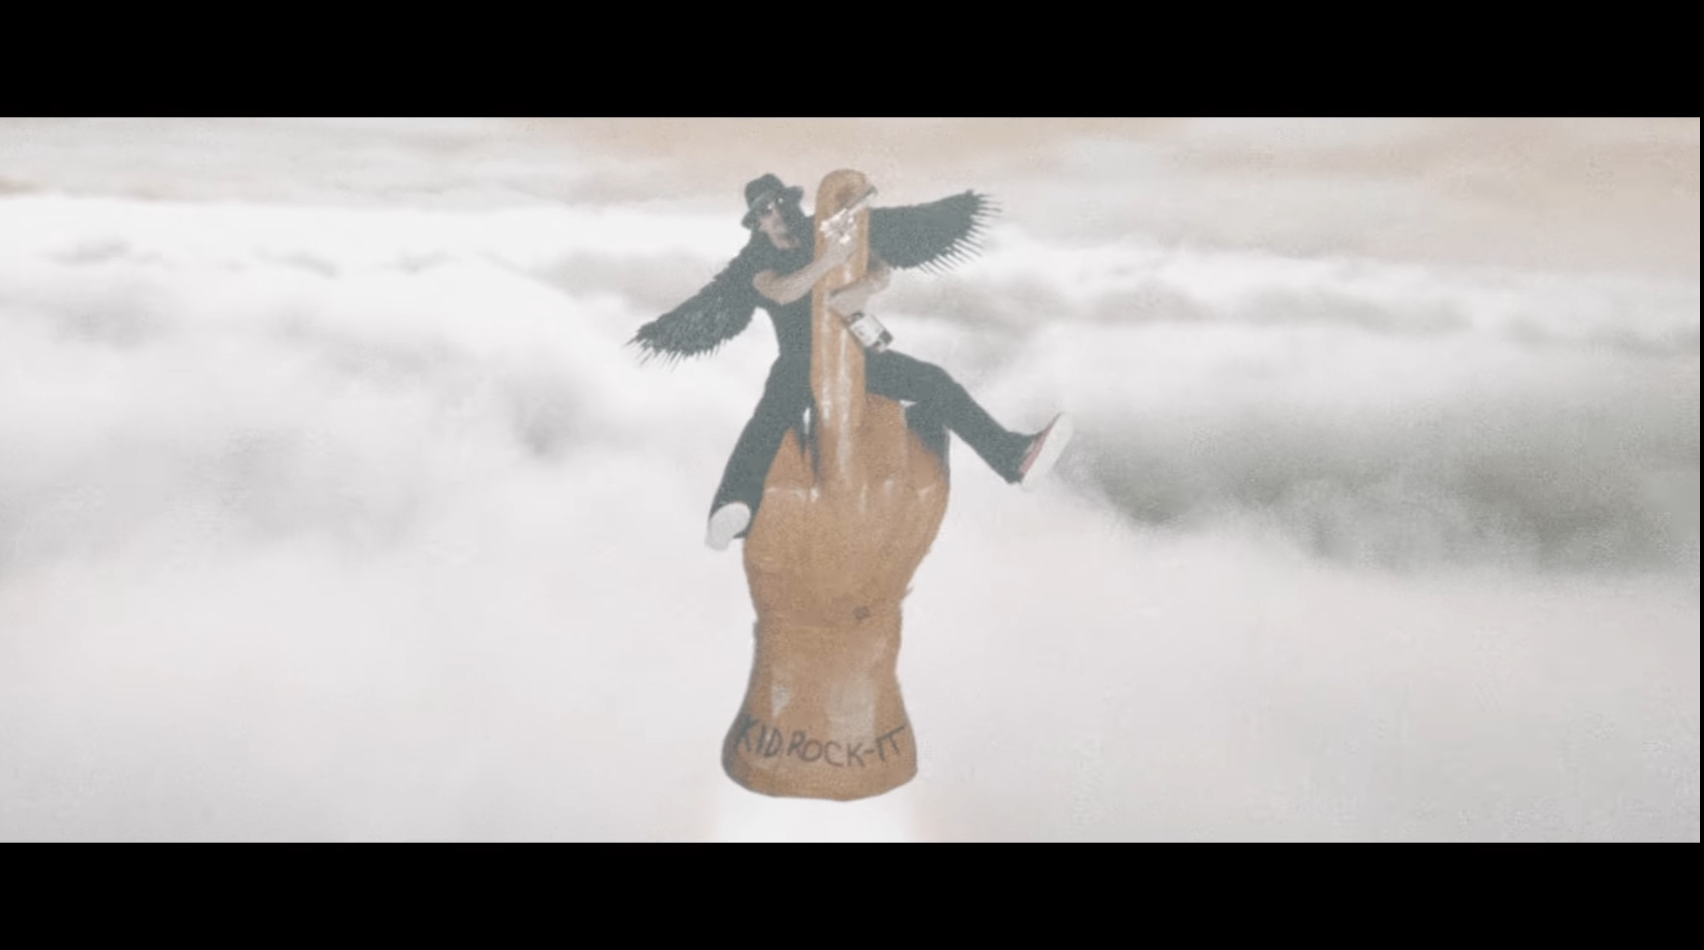 Conceptual artist Kid Rock soars to Mars on a giant middle finger